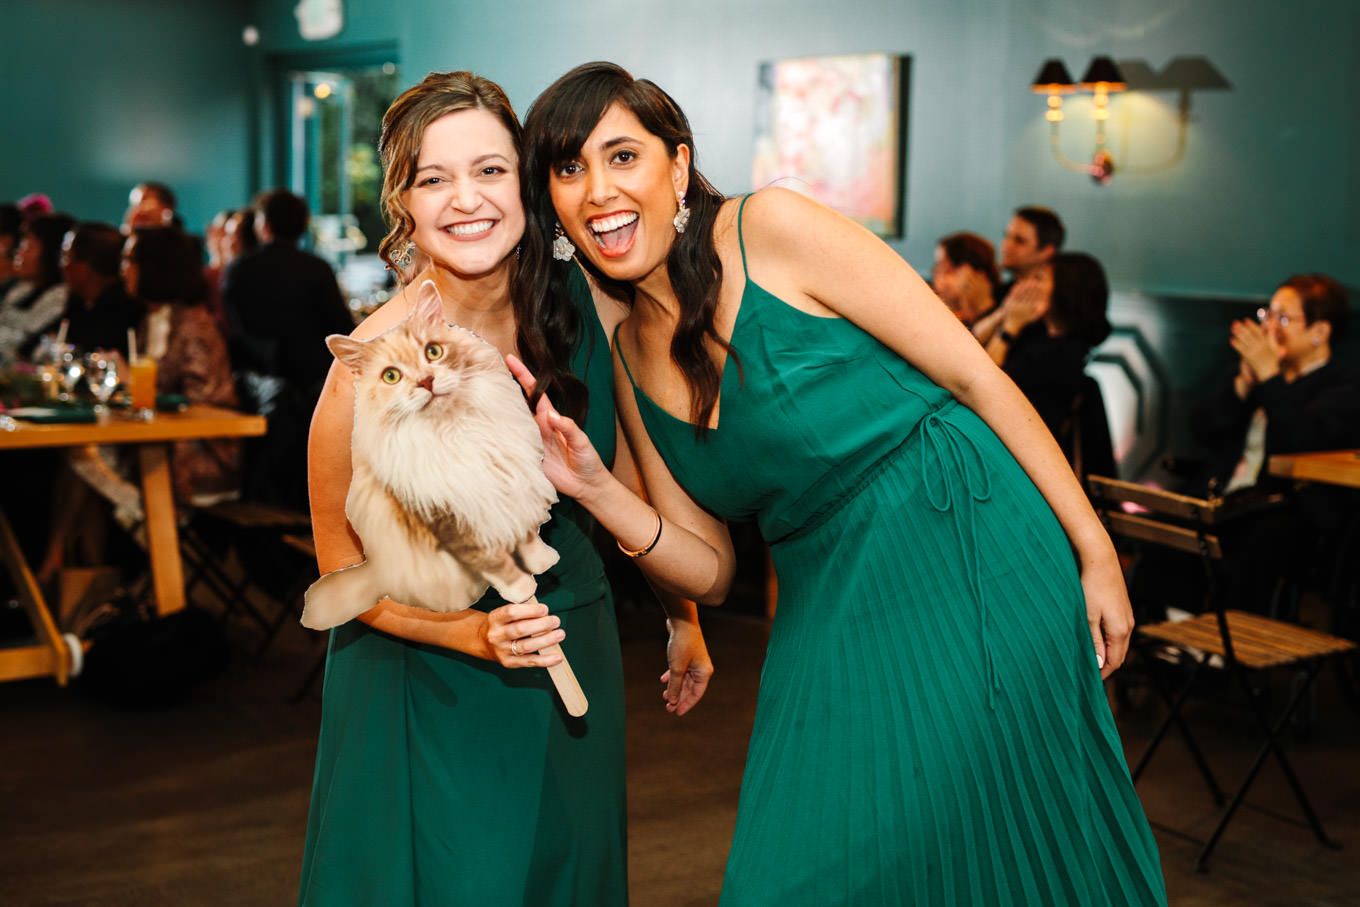 Bridesmaids with cat cutout | TV inspired wedding at The Fig House Los Angeles | Published on The Knot | Fresh and colorful photography for fun-loving couples in Southern California | #losangeleswedding #TVwedding #colorfulwedding #theknot   Source: Mary Costa Photography | Los Angeles wedding photographer